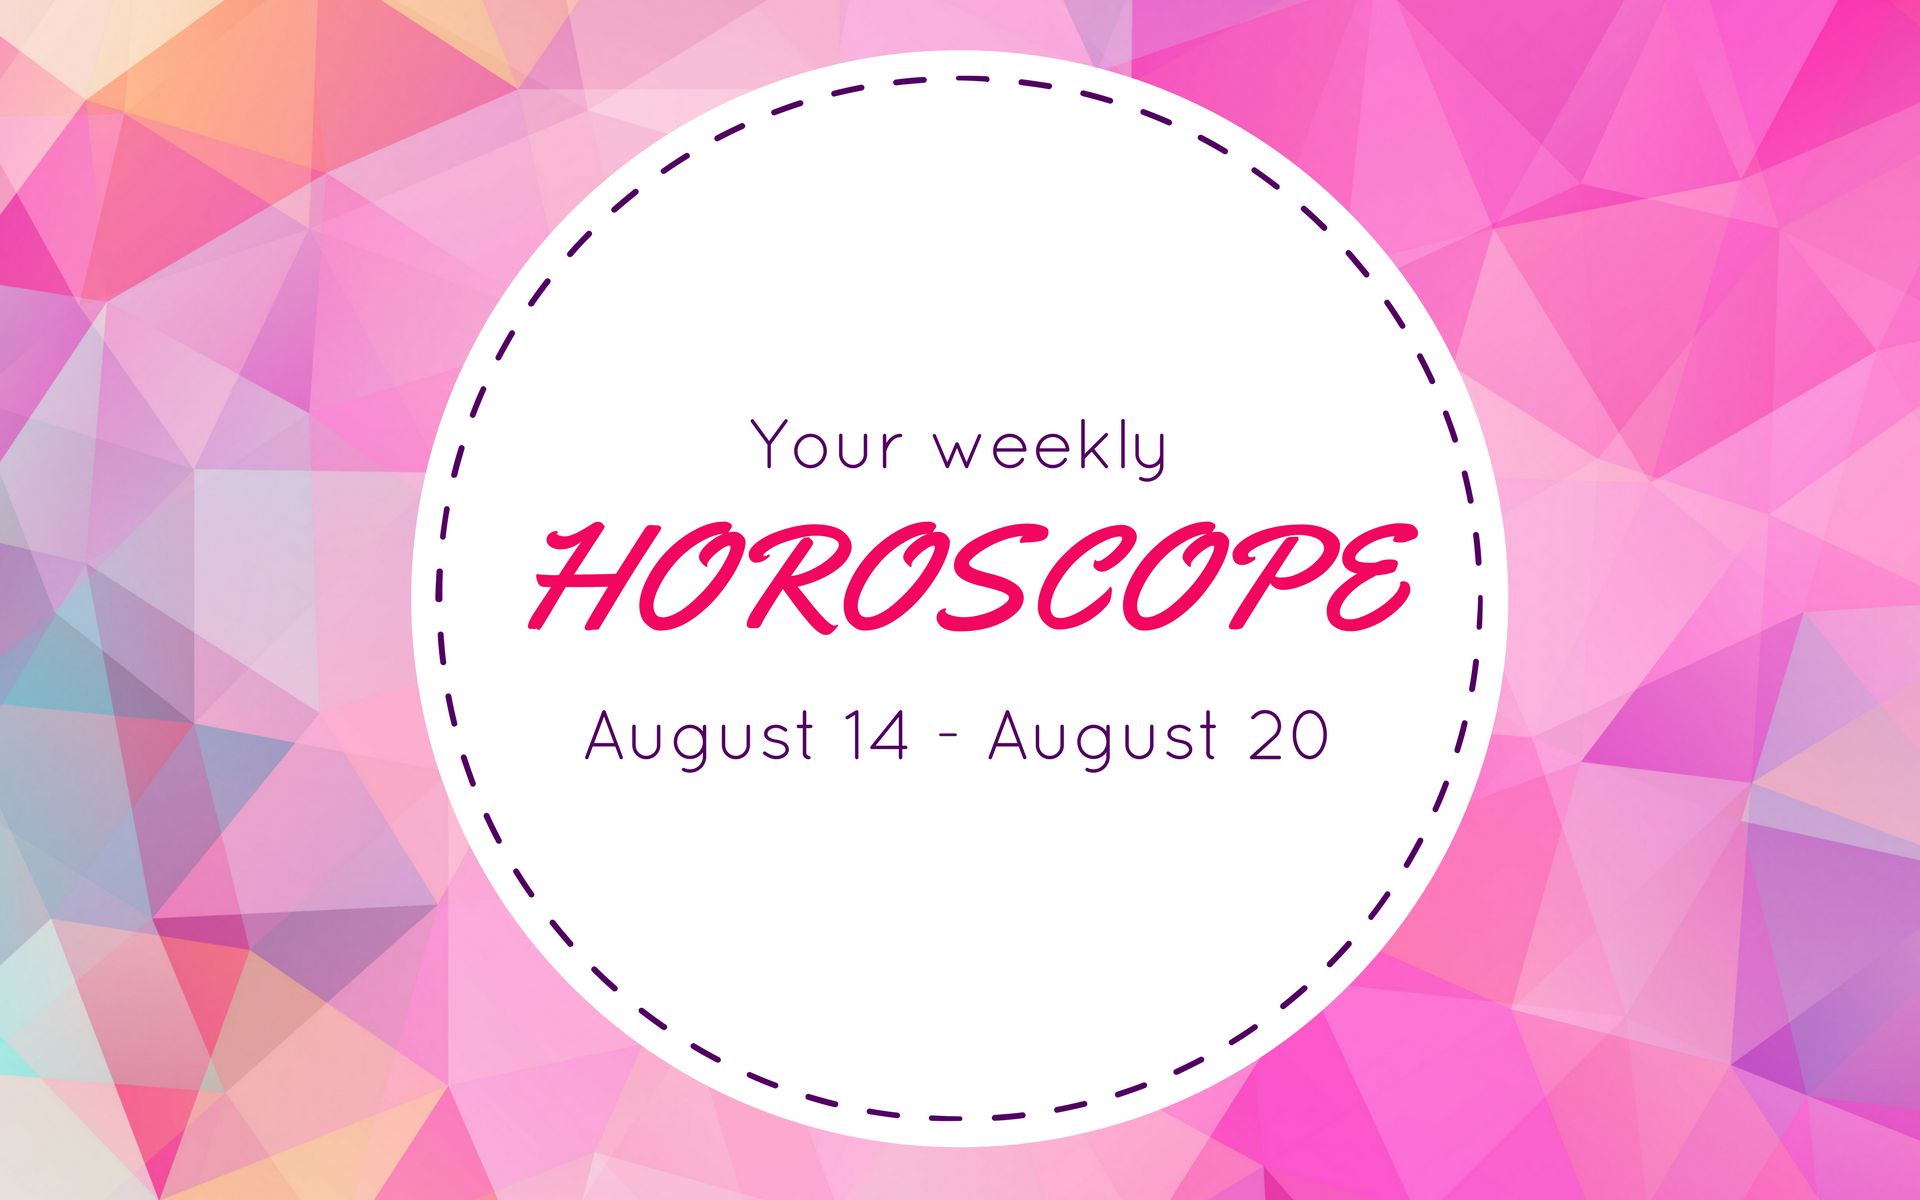 Your Weekly Horoscope: August 14 - August 20